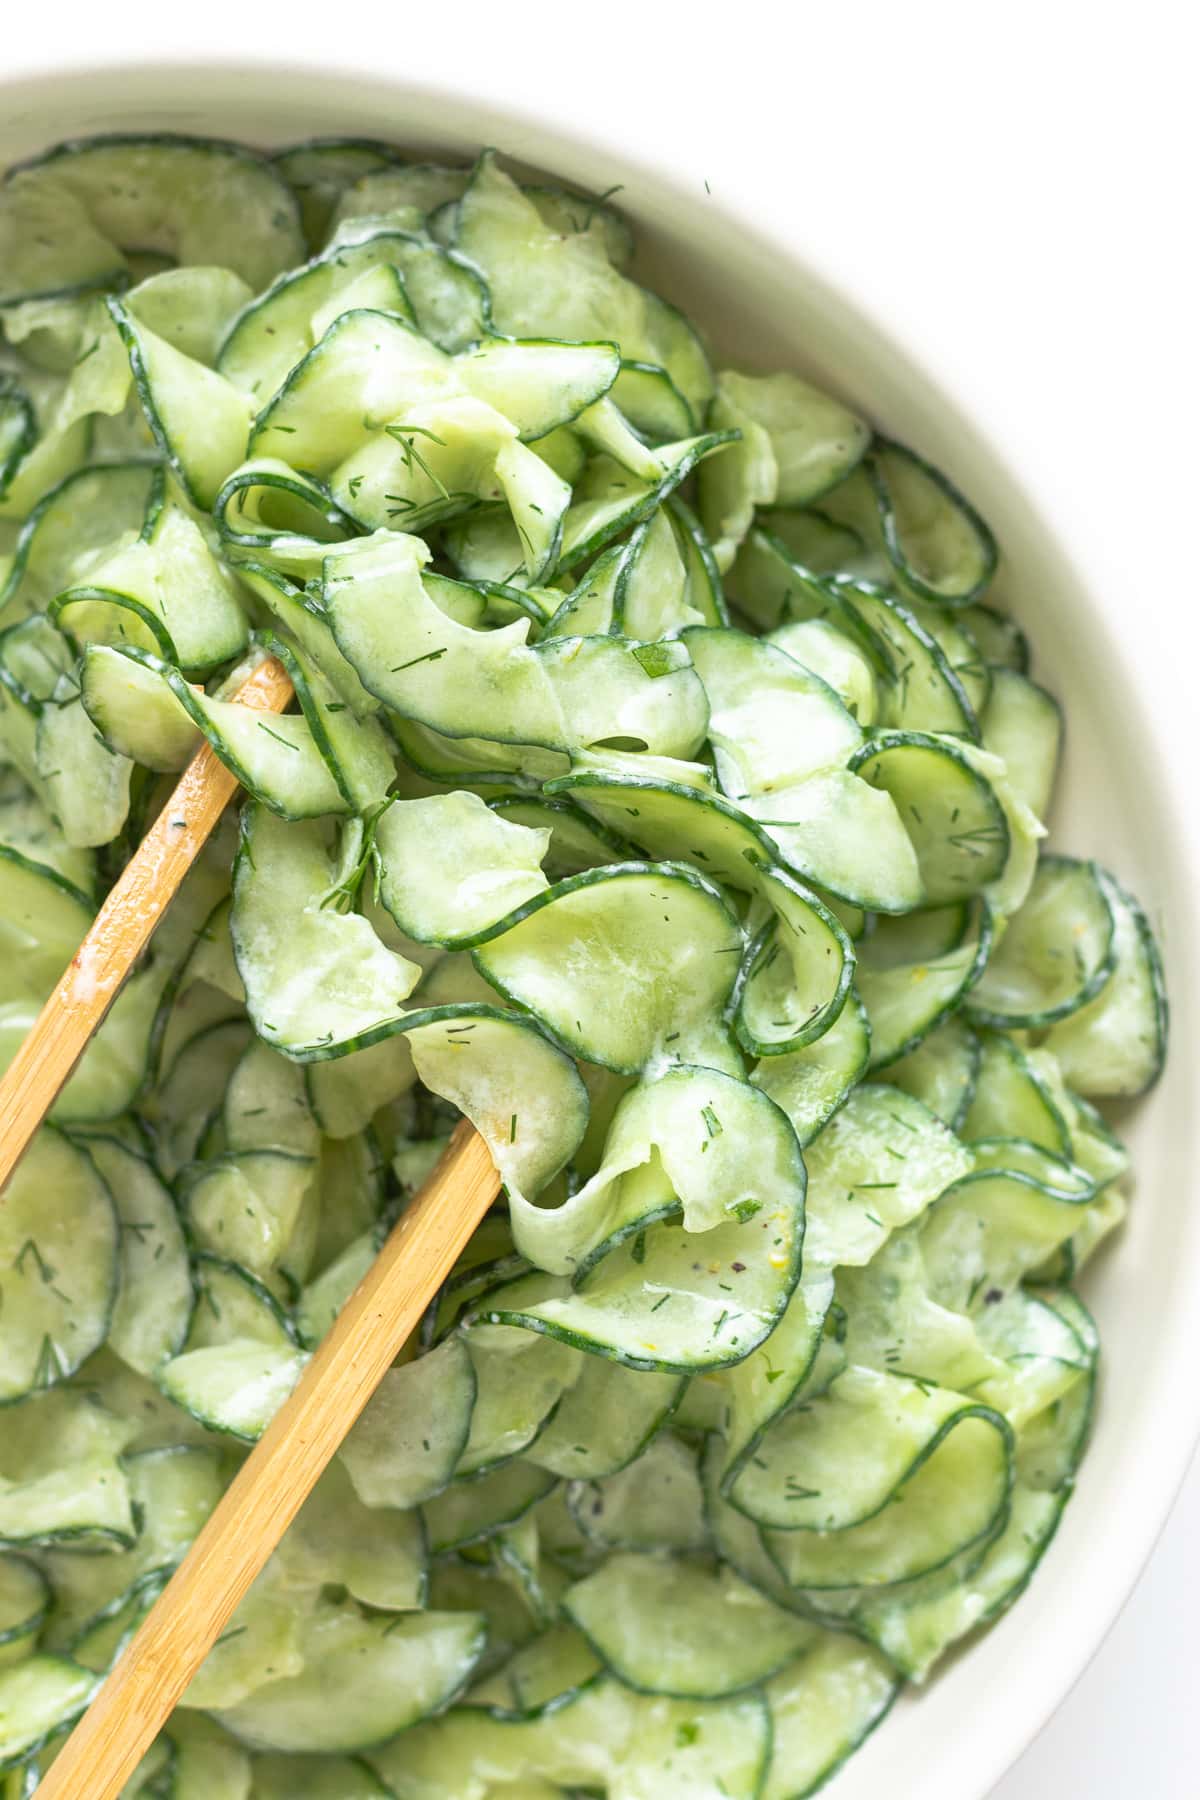 Bowl of spiralized cucumber salad with wood tongs.